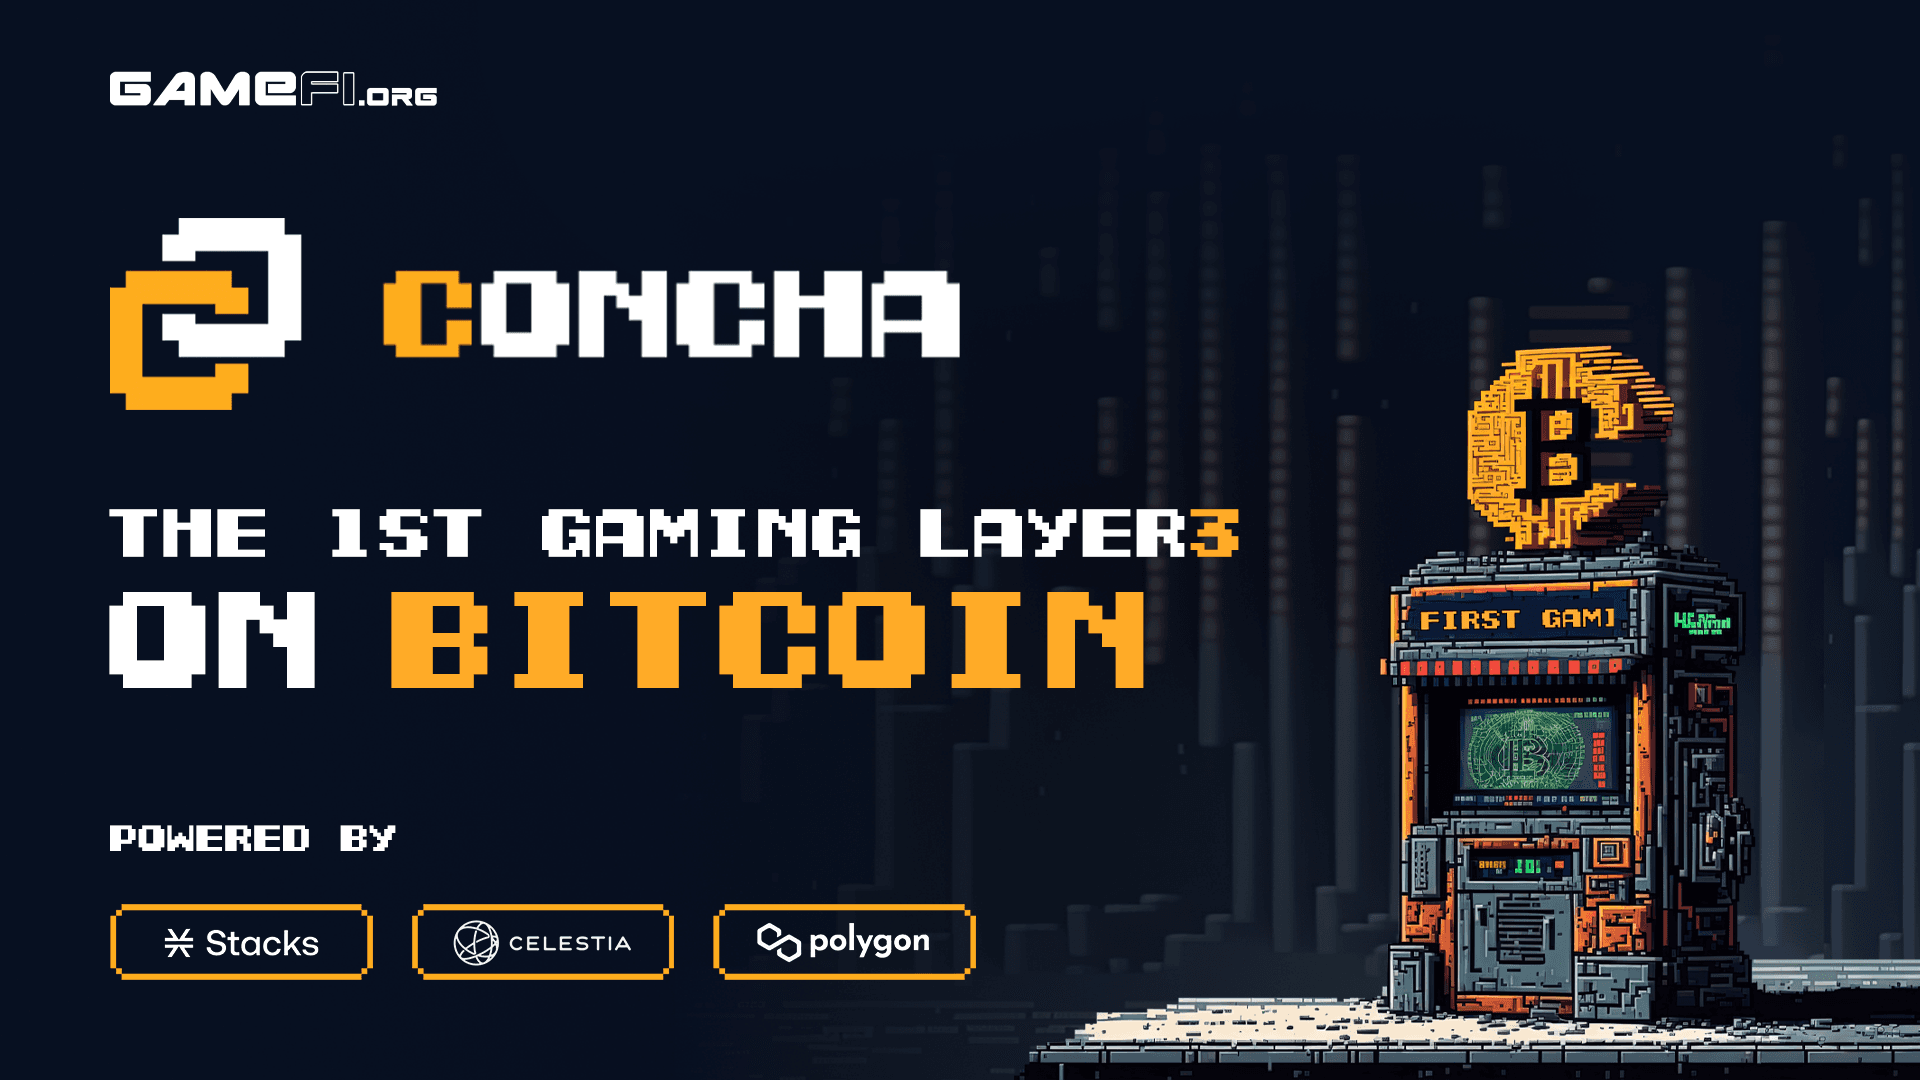 CONCHA of GAFI 2.0: Builds The First Gaming L3 on Bitcoin - Powered by Stacks, Celestia, and Polygon.